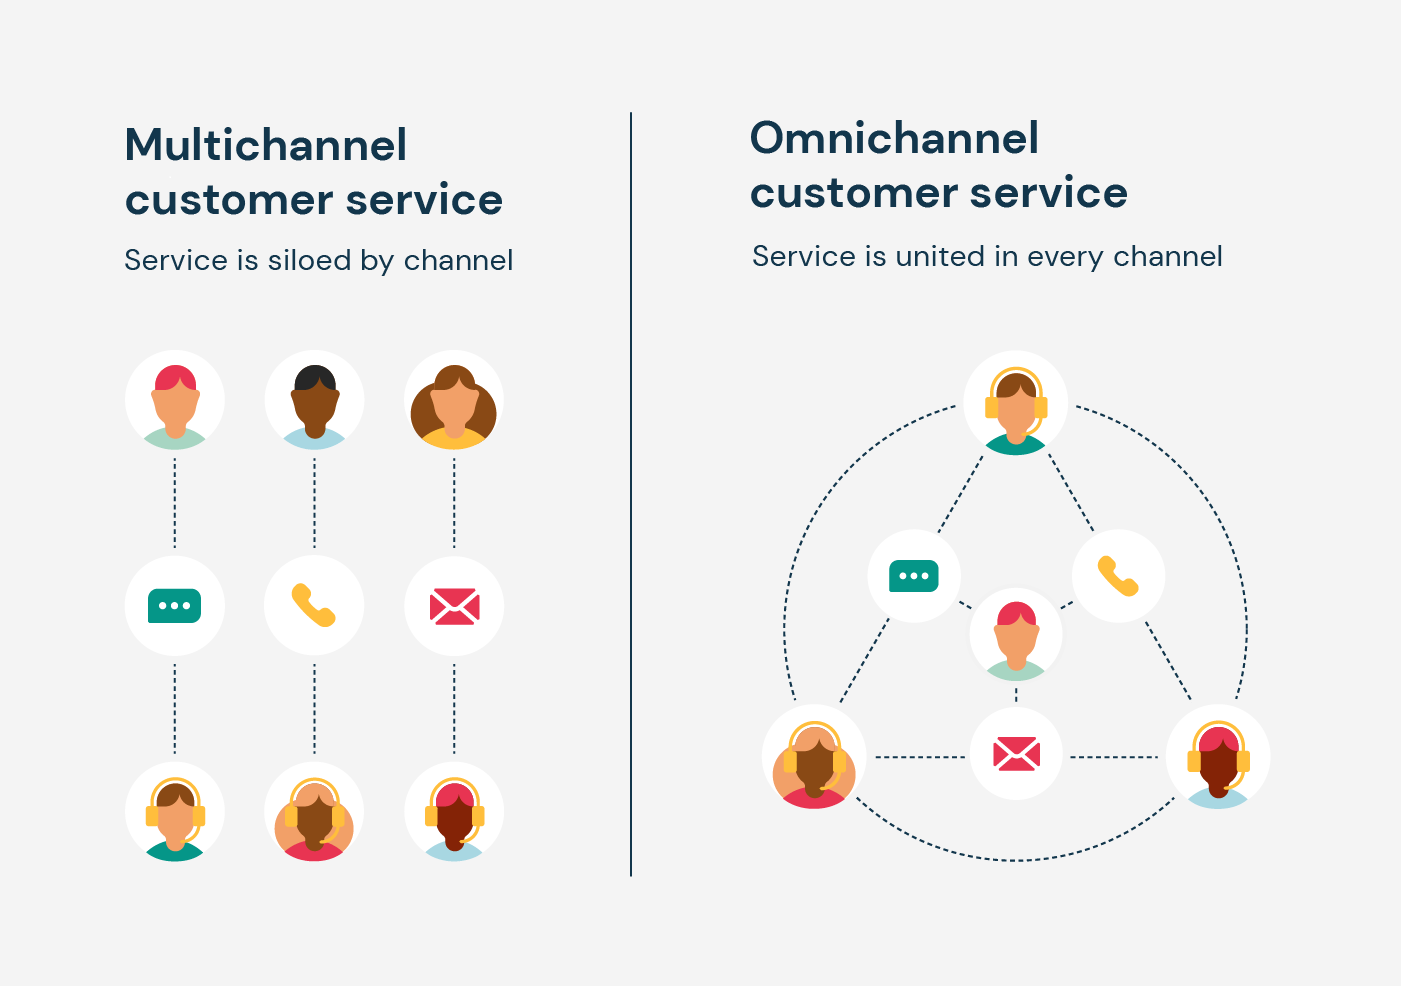 Image explaining why omichannel is better than multichannel customer service